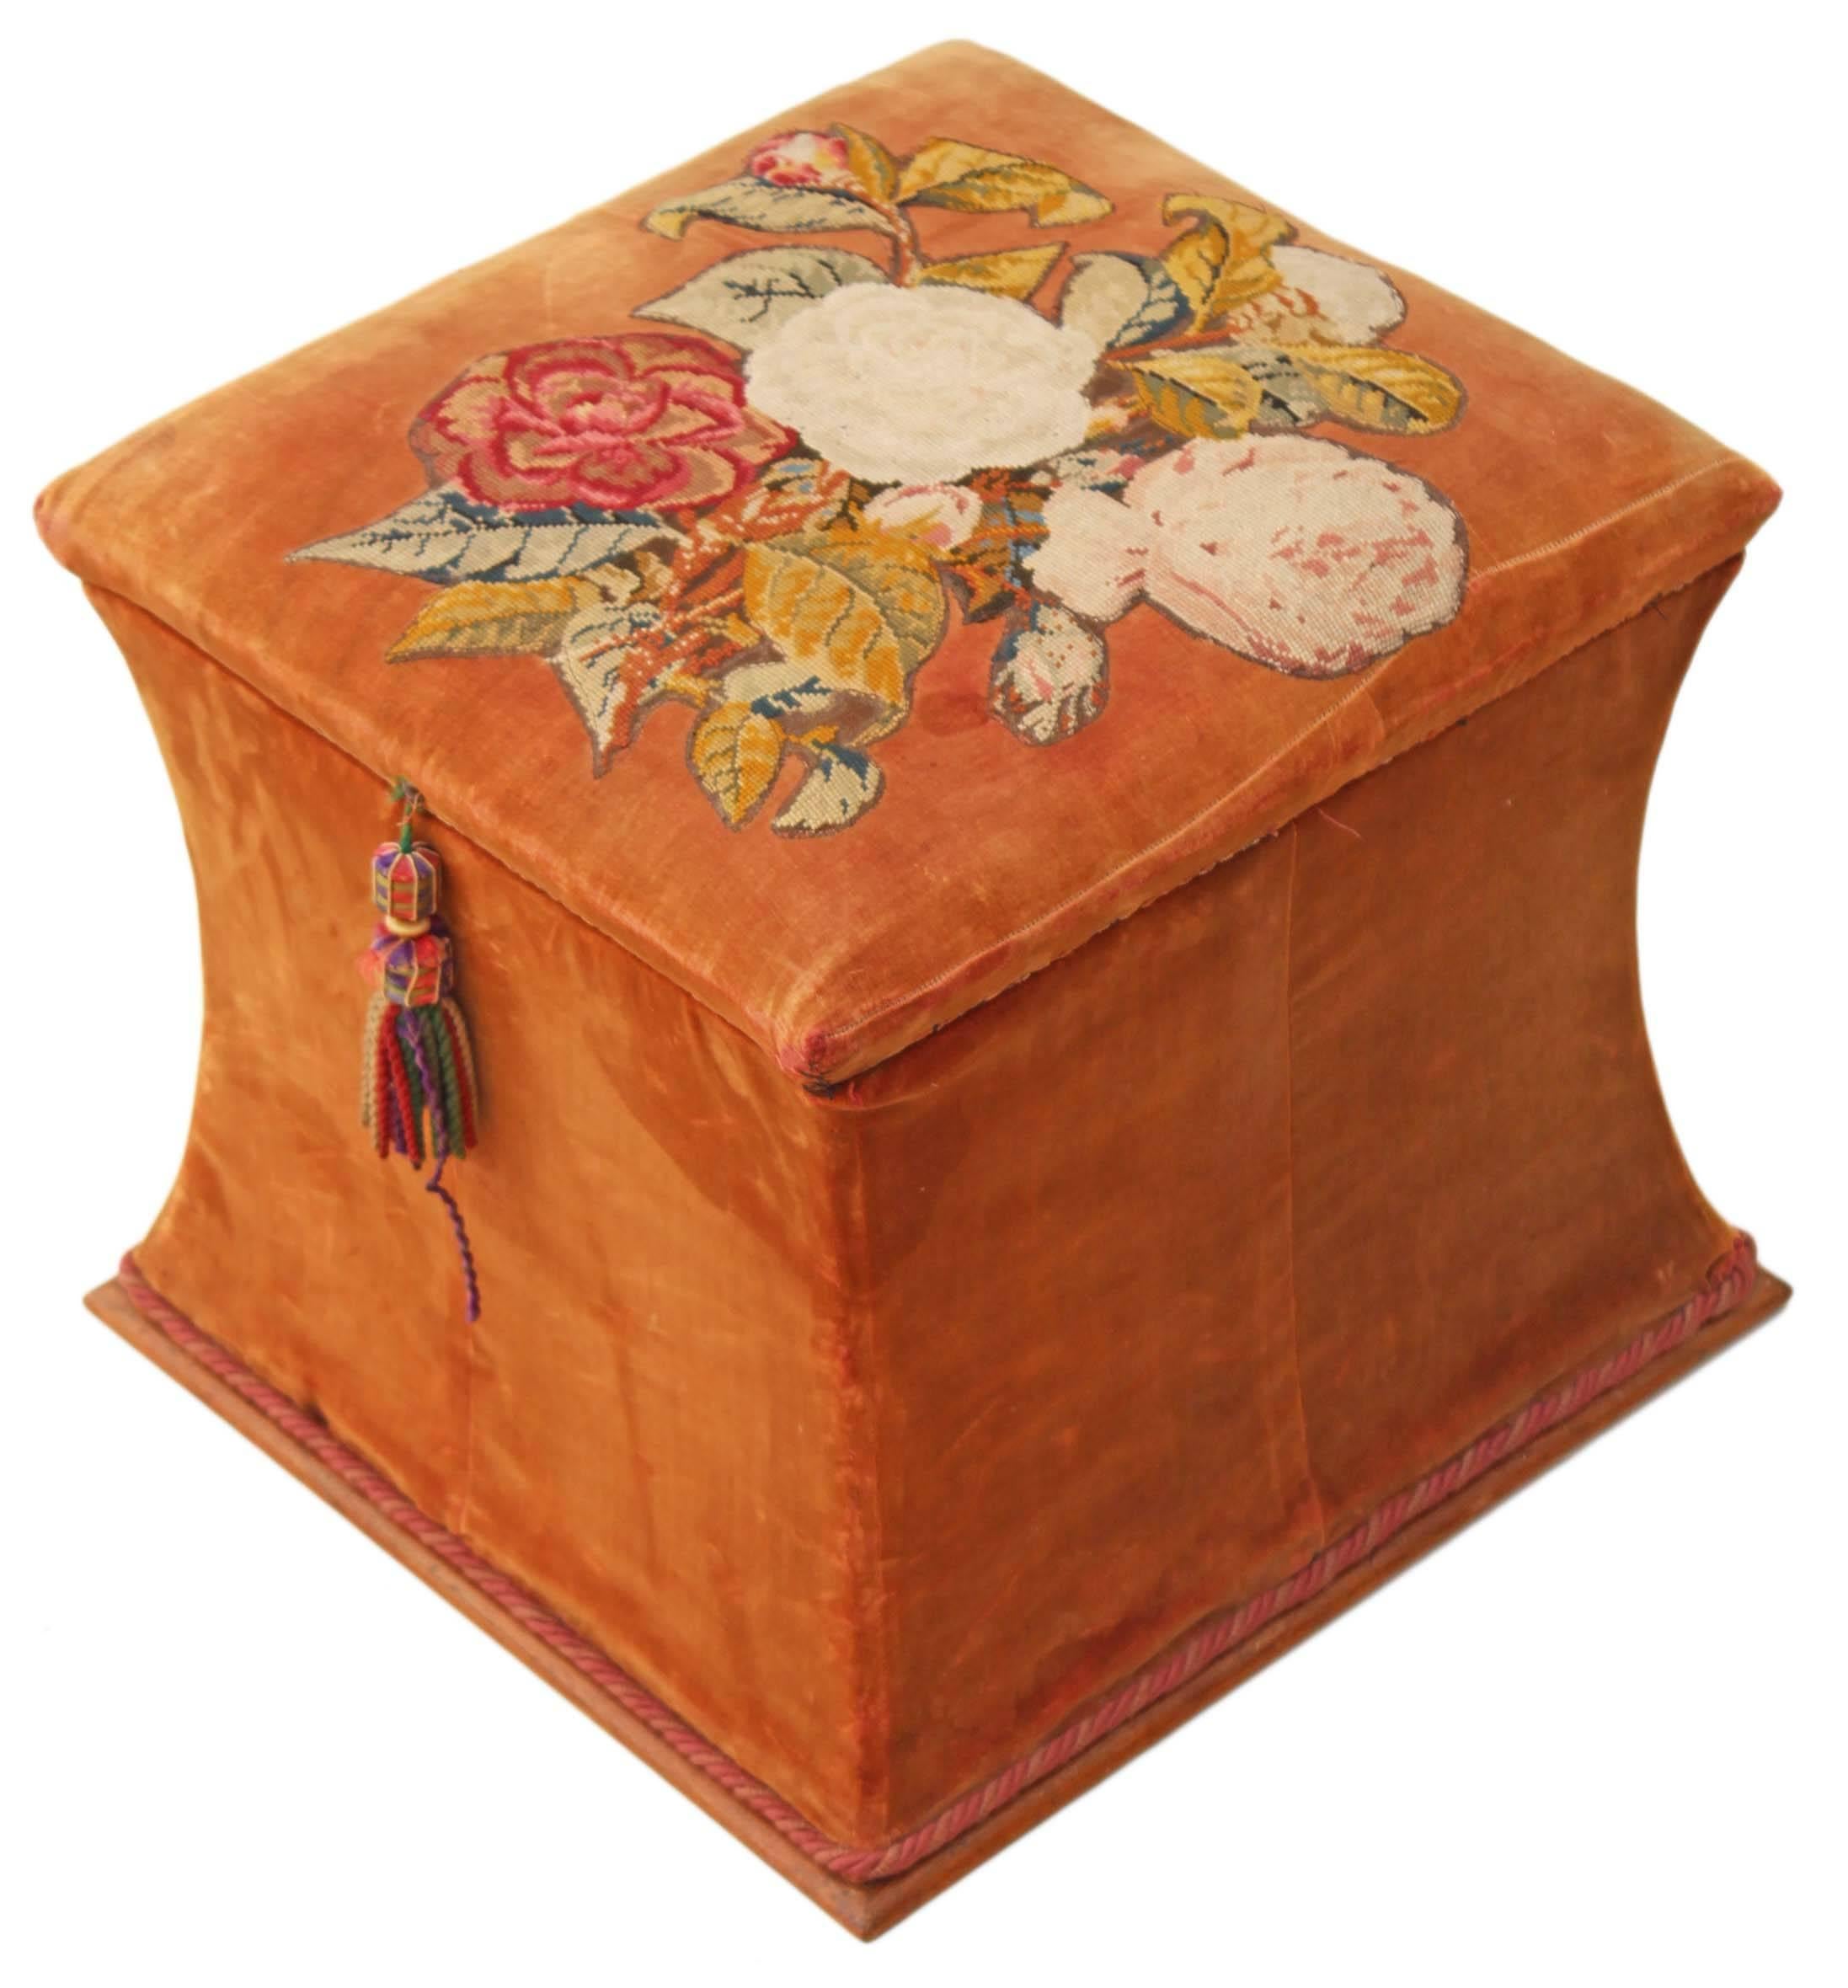 Antique Victorian 19th century shaped upholstered needlepoint ottoman or blanket box.

This ottoman is full of age, charm and character. So rare with concave sides.

The upholstery is old, worn and faded, with marks. Internally it is very tatty,